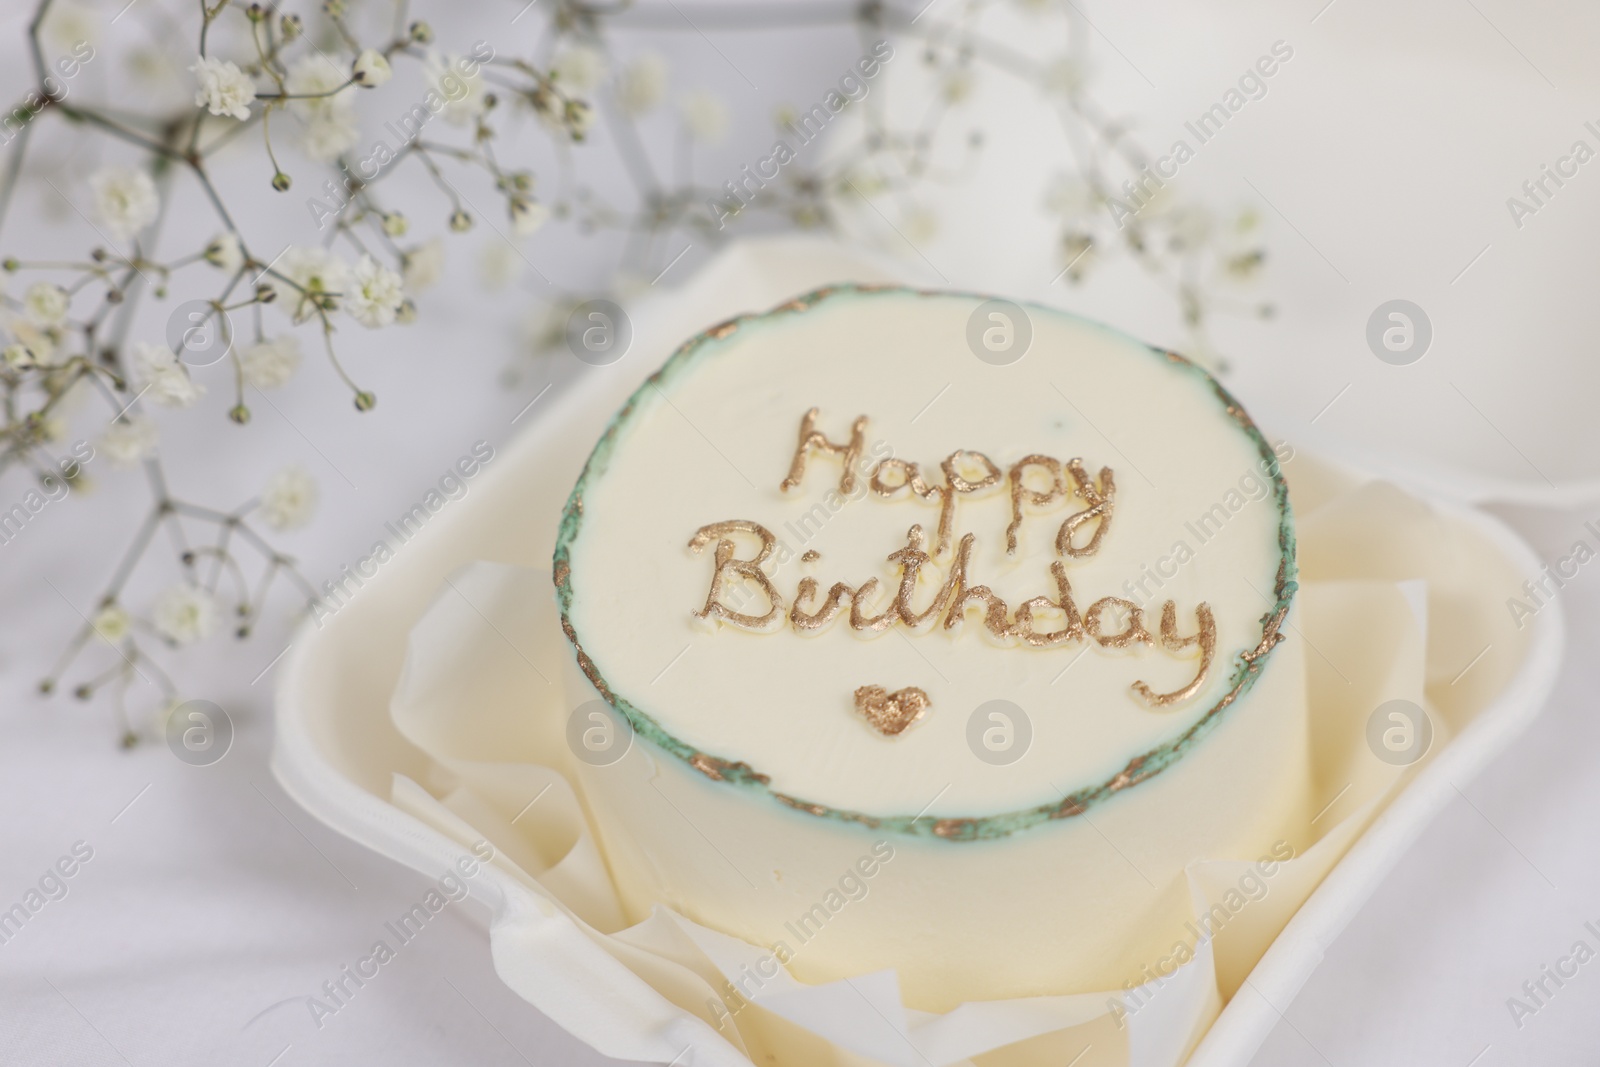 Photo of Delicious decorated Birthday cake near dry flowers on white cloth